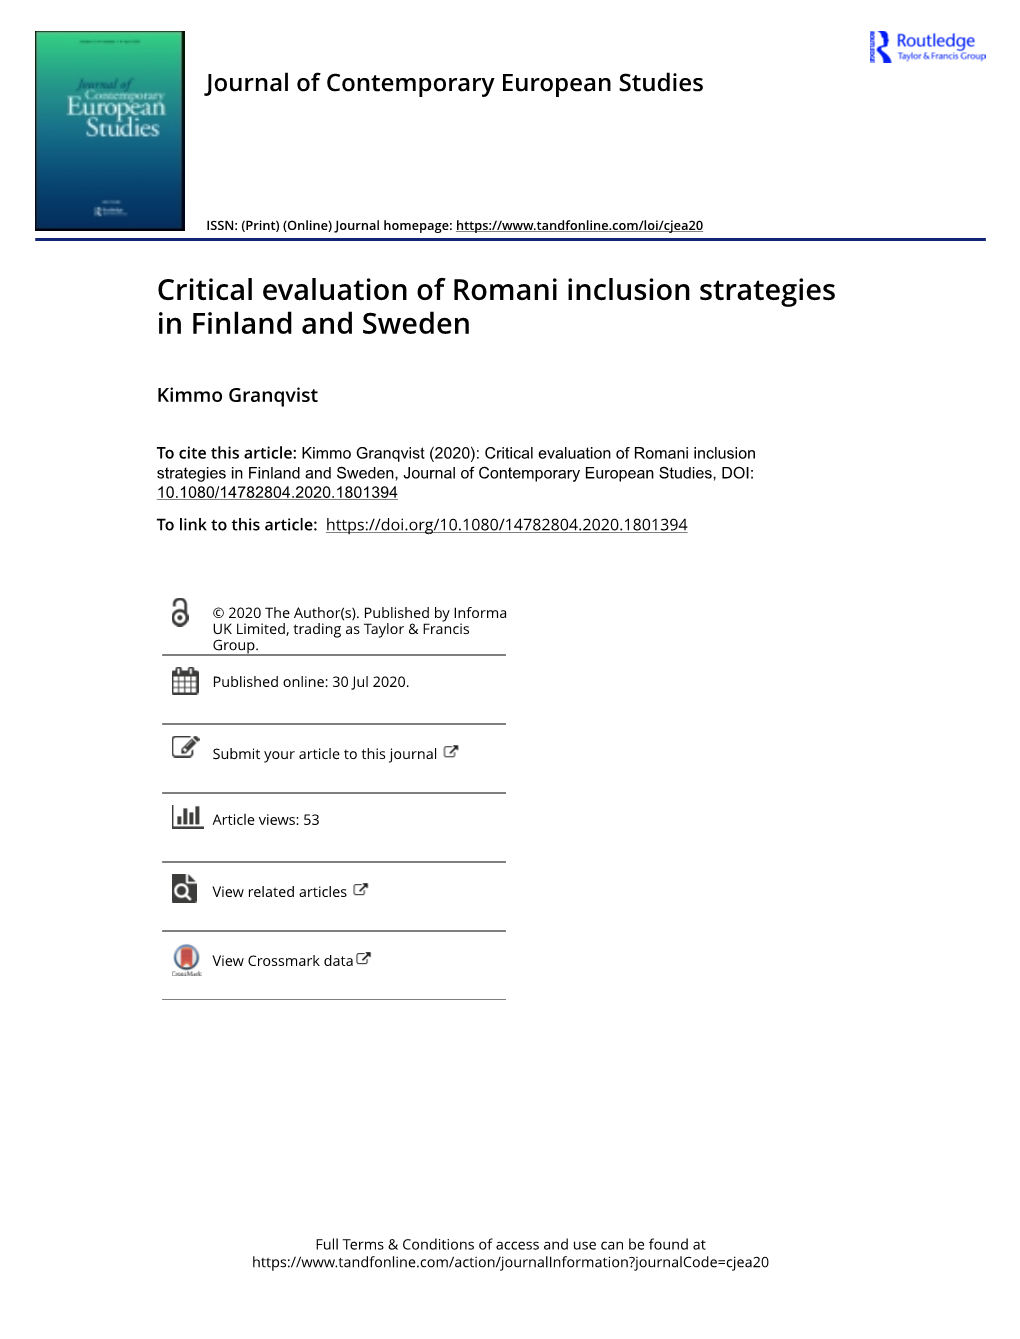 Critical Evaluation of Romani Inclusion Strategies in Finland and Sweden